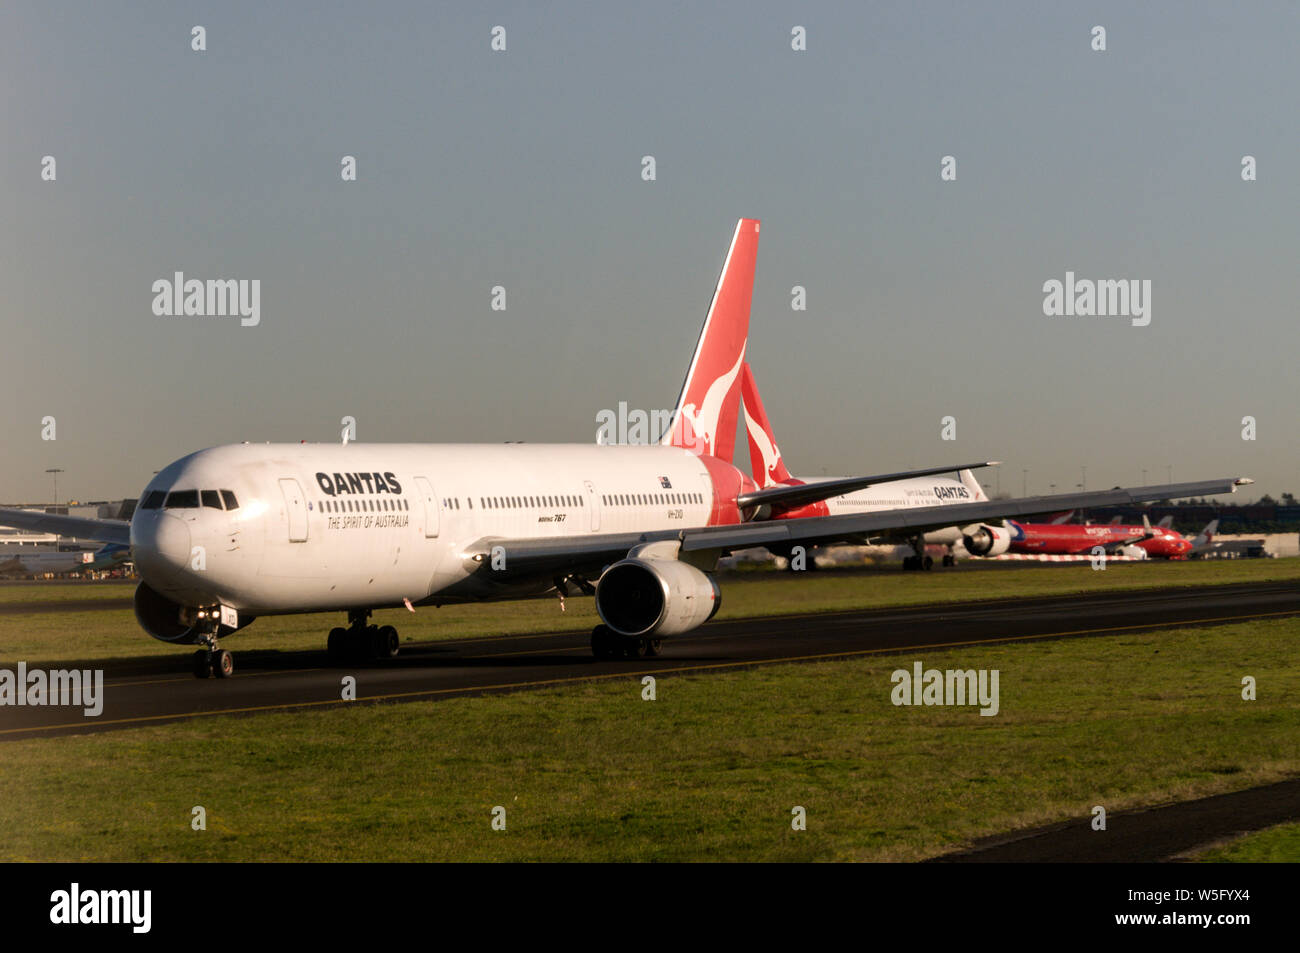 A Qantas Boeing 767 taxiing to the main runway at Sydney (Kingsford Smith) airport near Sydney in New South Wales, Australia Stock Photo